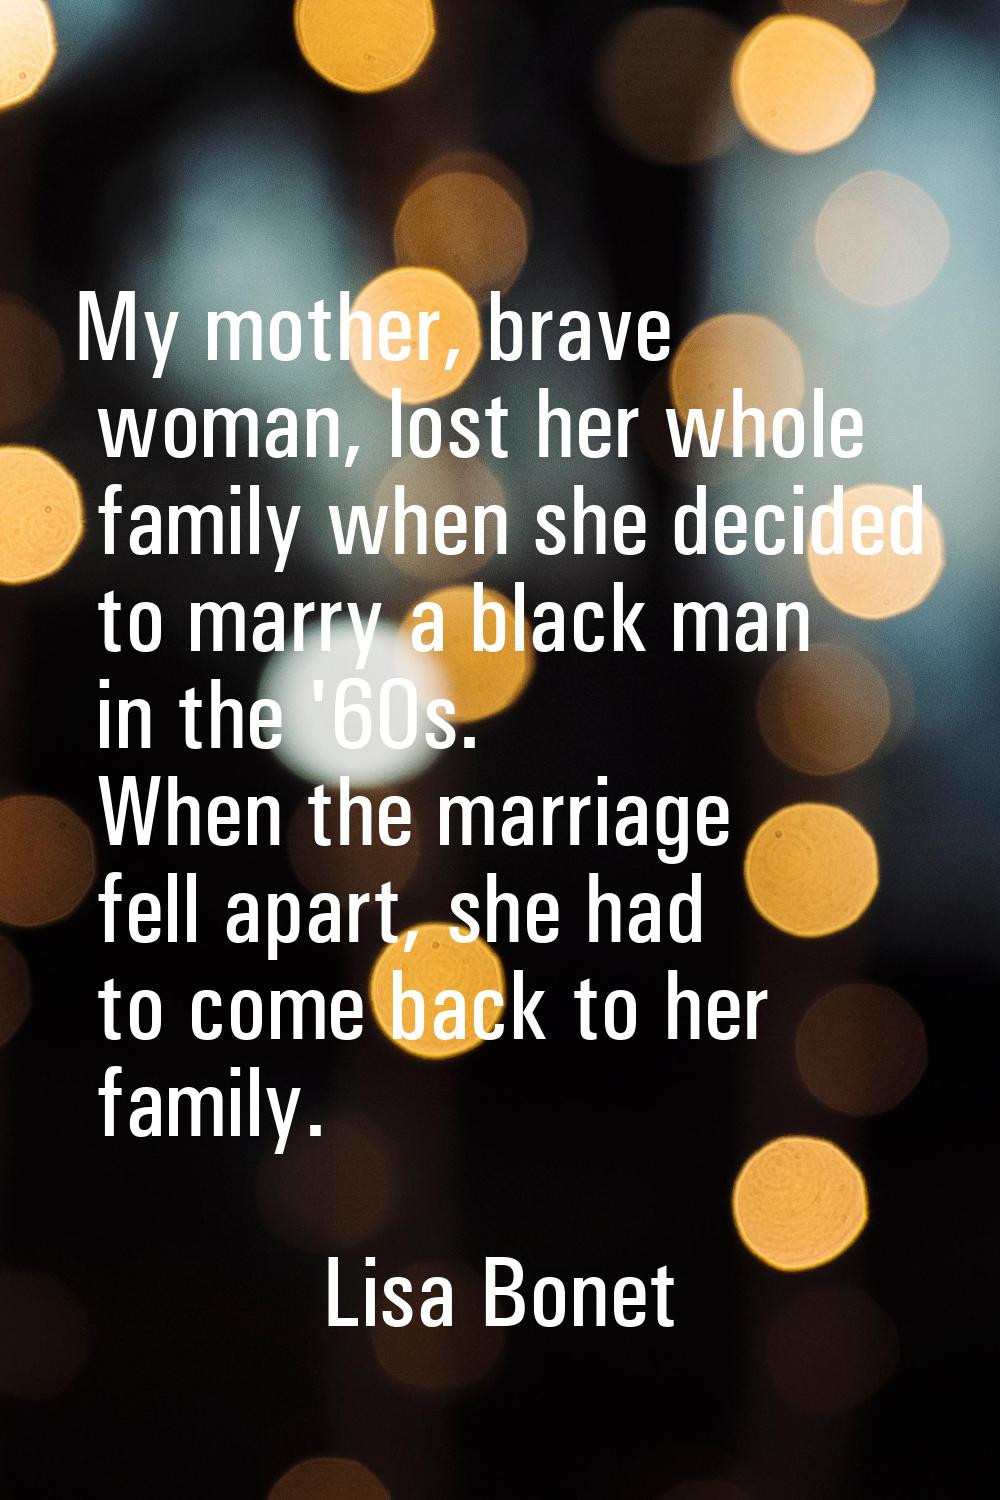 My mother, brave woman, lost her whole family when she decided to marry a black man in the '60s. Wh